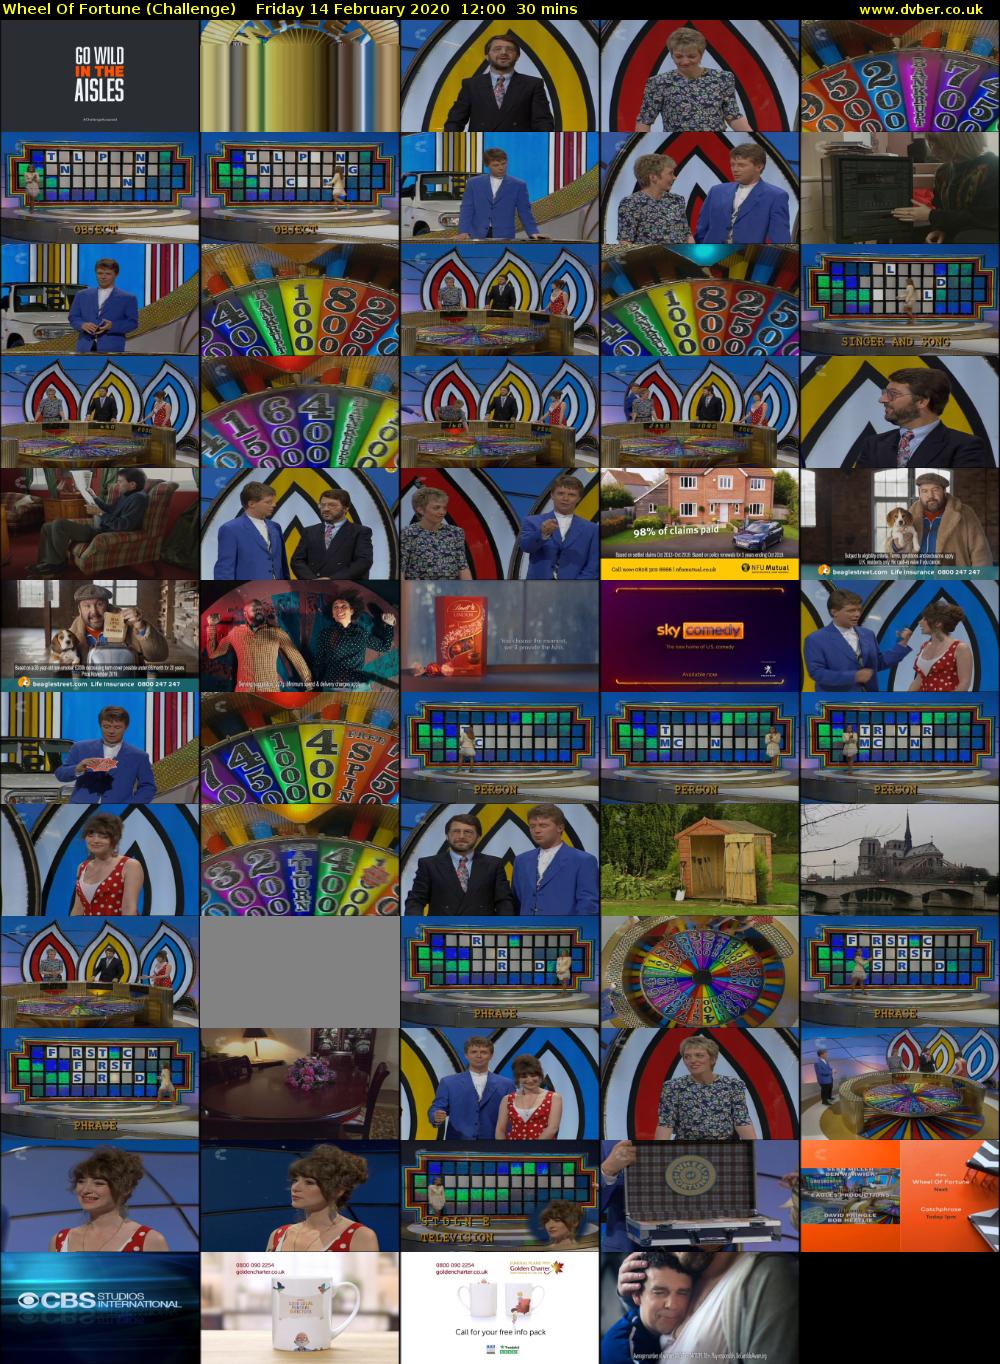 Wheel Of Fortune (Challenge) Friday 14 February 2020 12:00 - 12:30